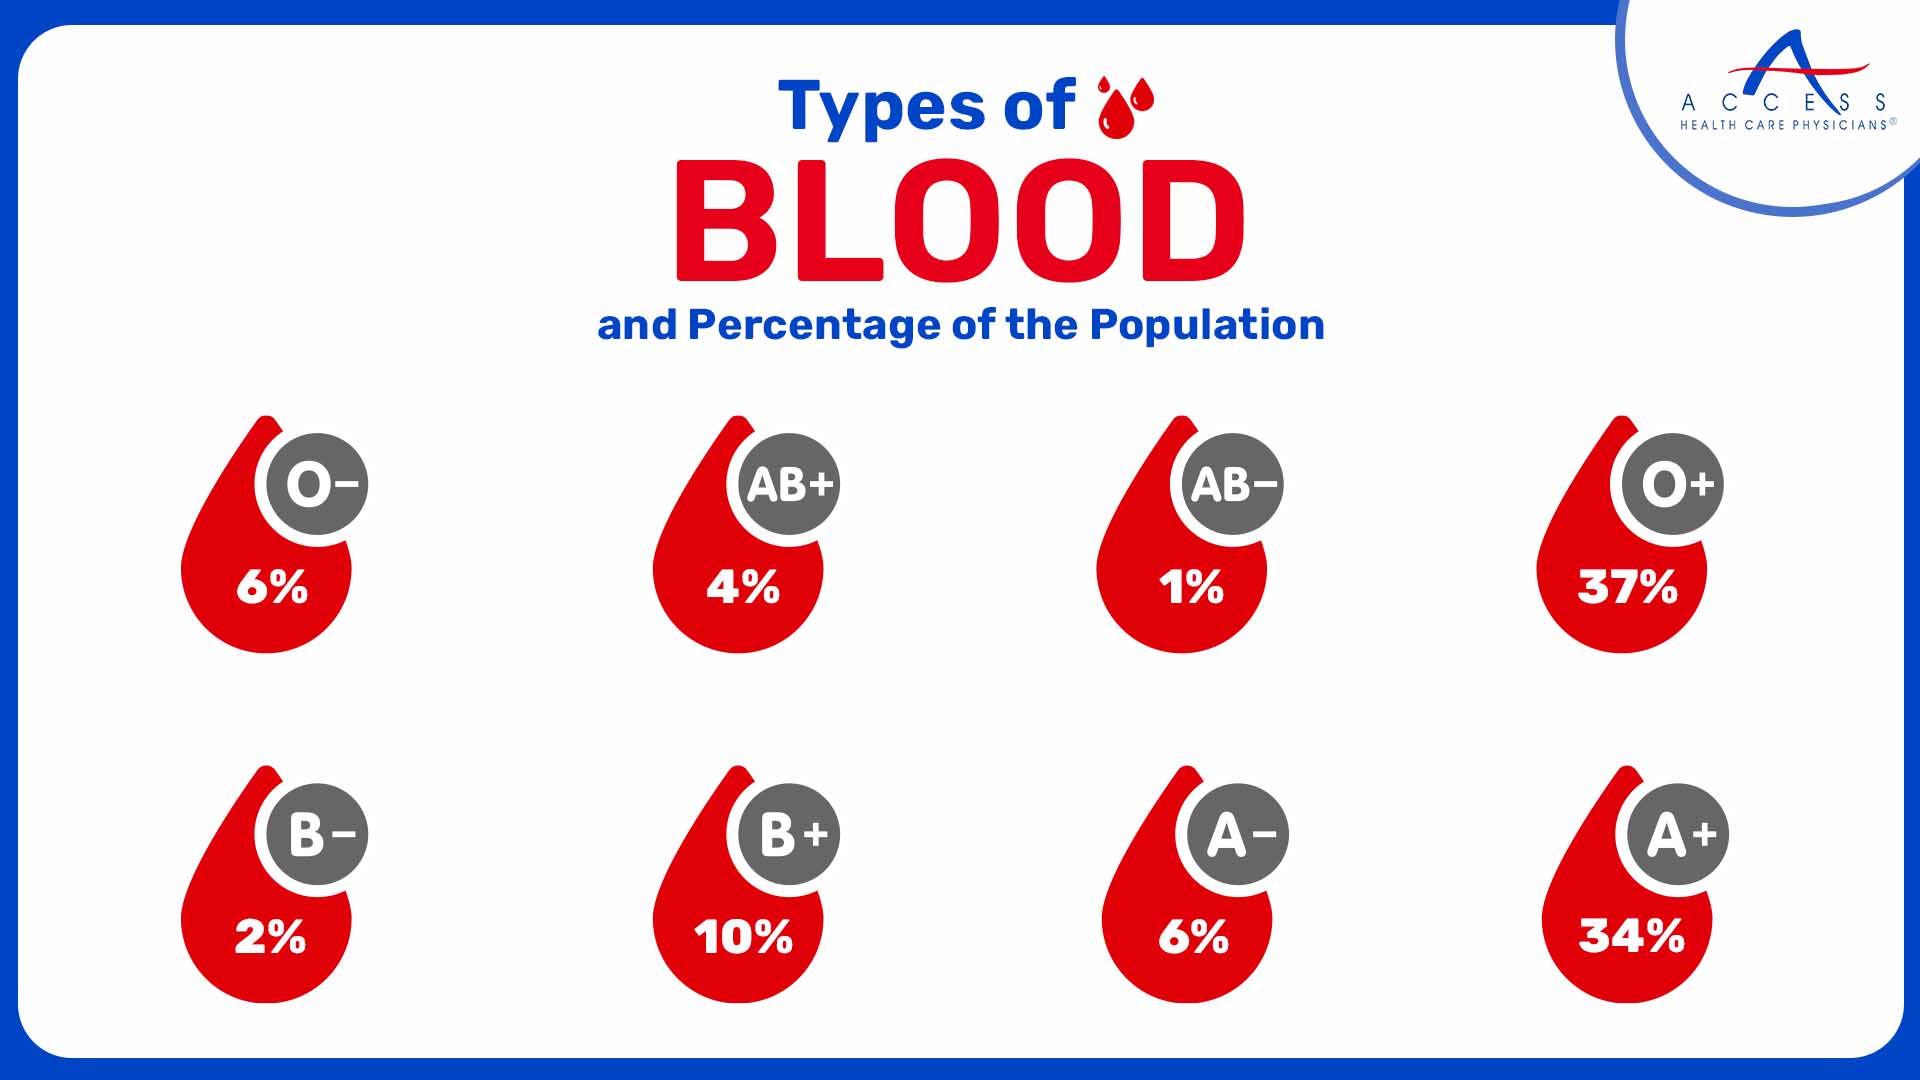 Types of Blood